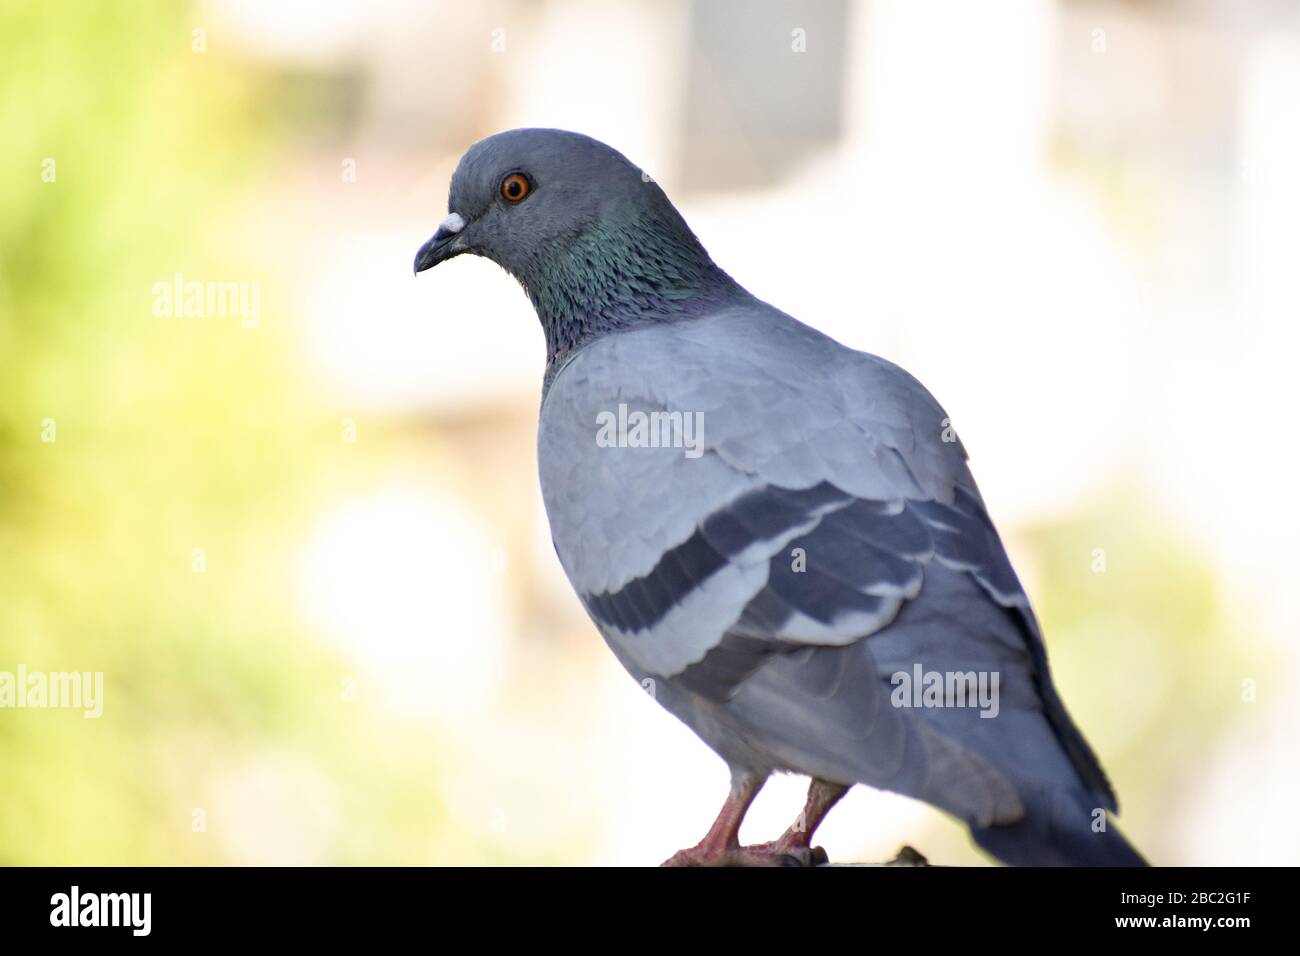 Pigeon resting on a terrace and looking for food while sitting on wire. Stock Photo